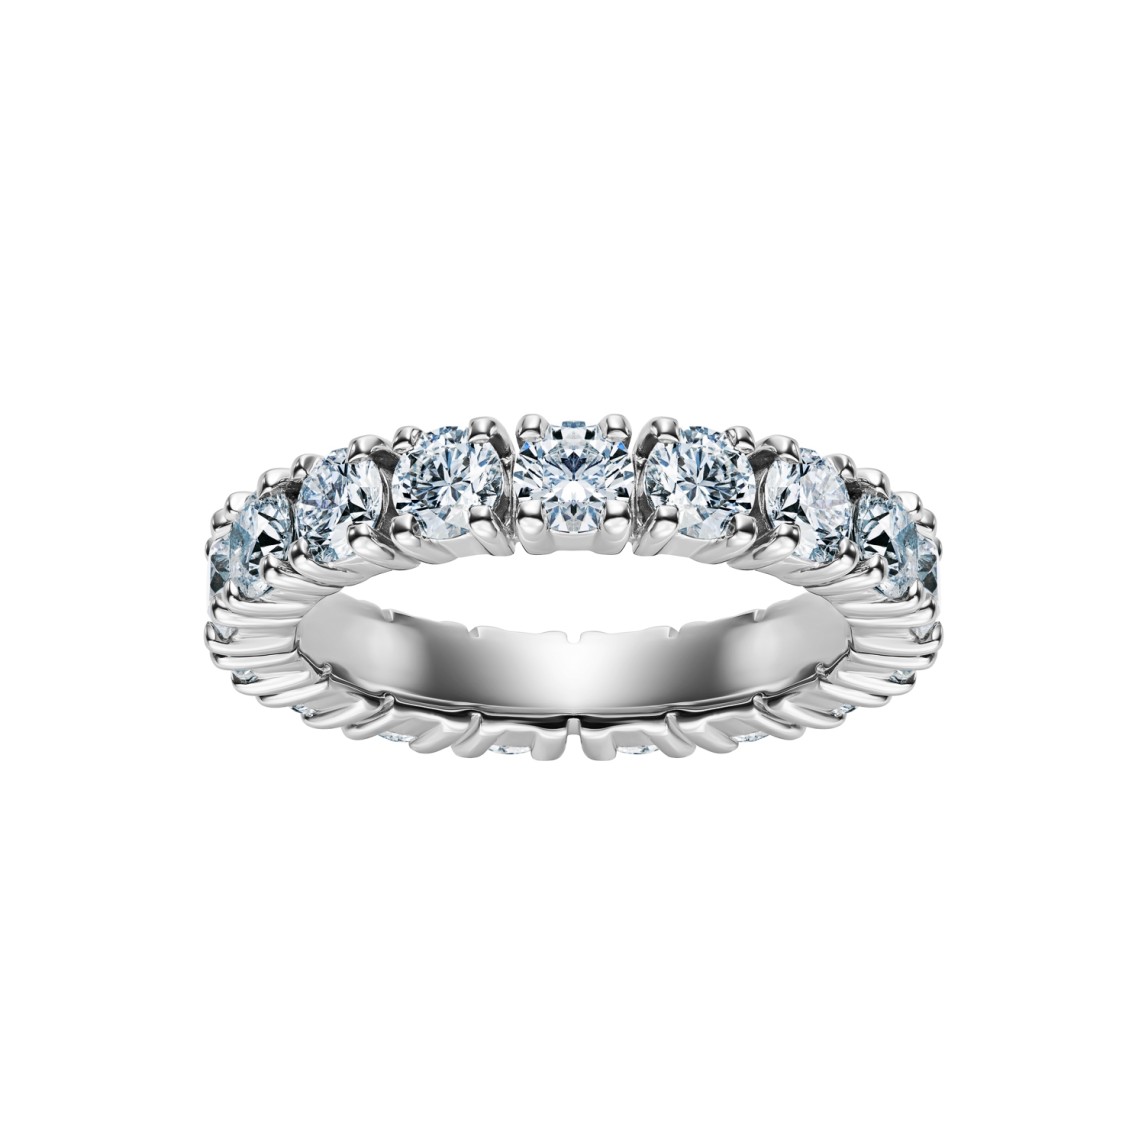 White Gold Eternity Ring With Diamonds